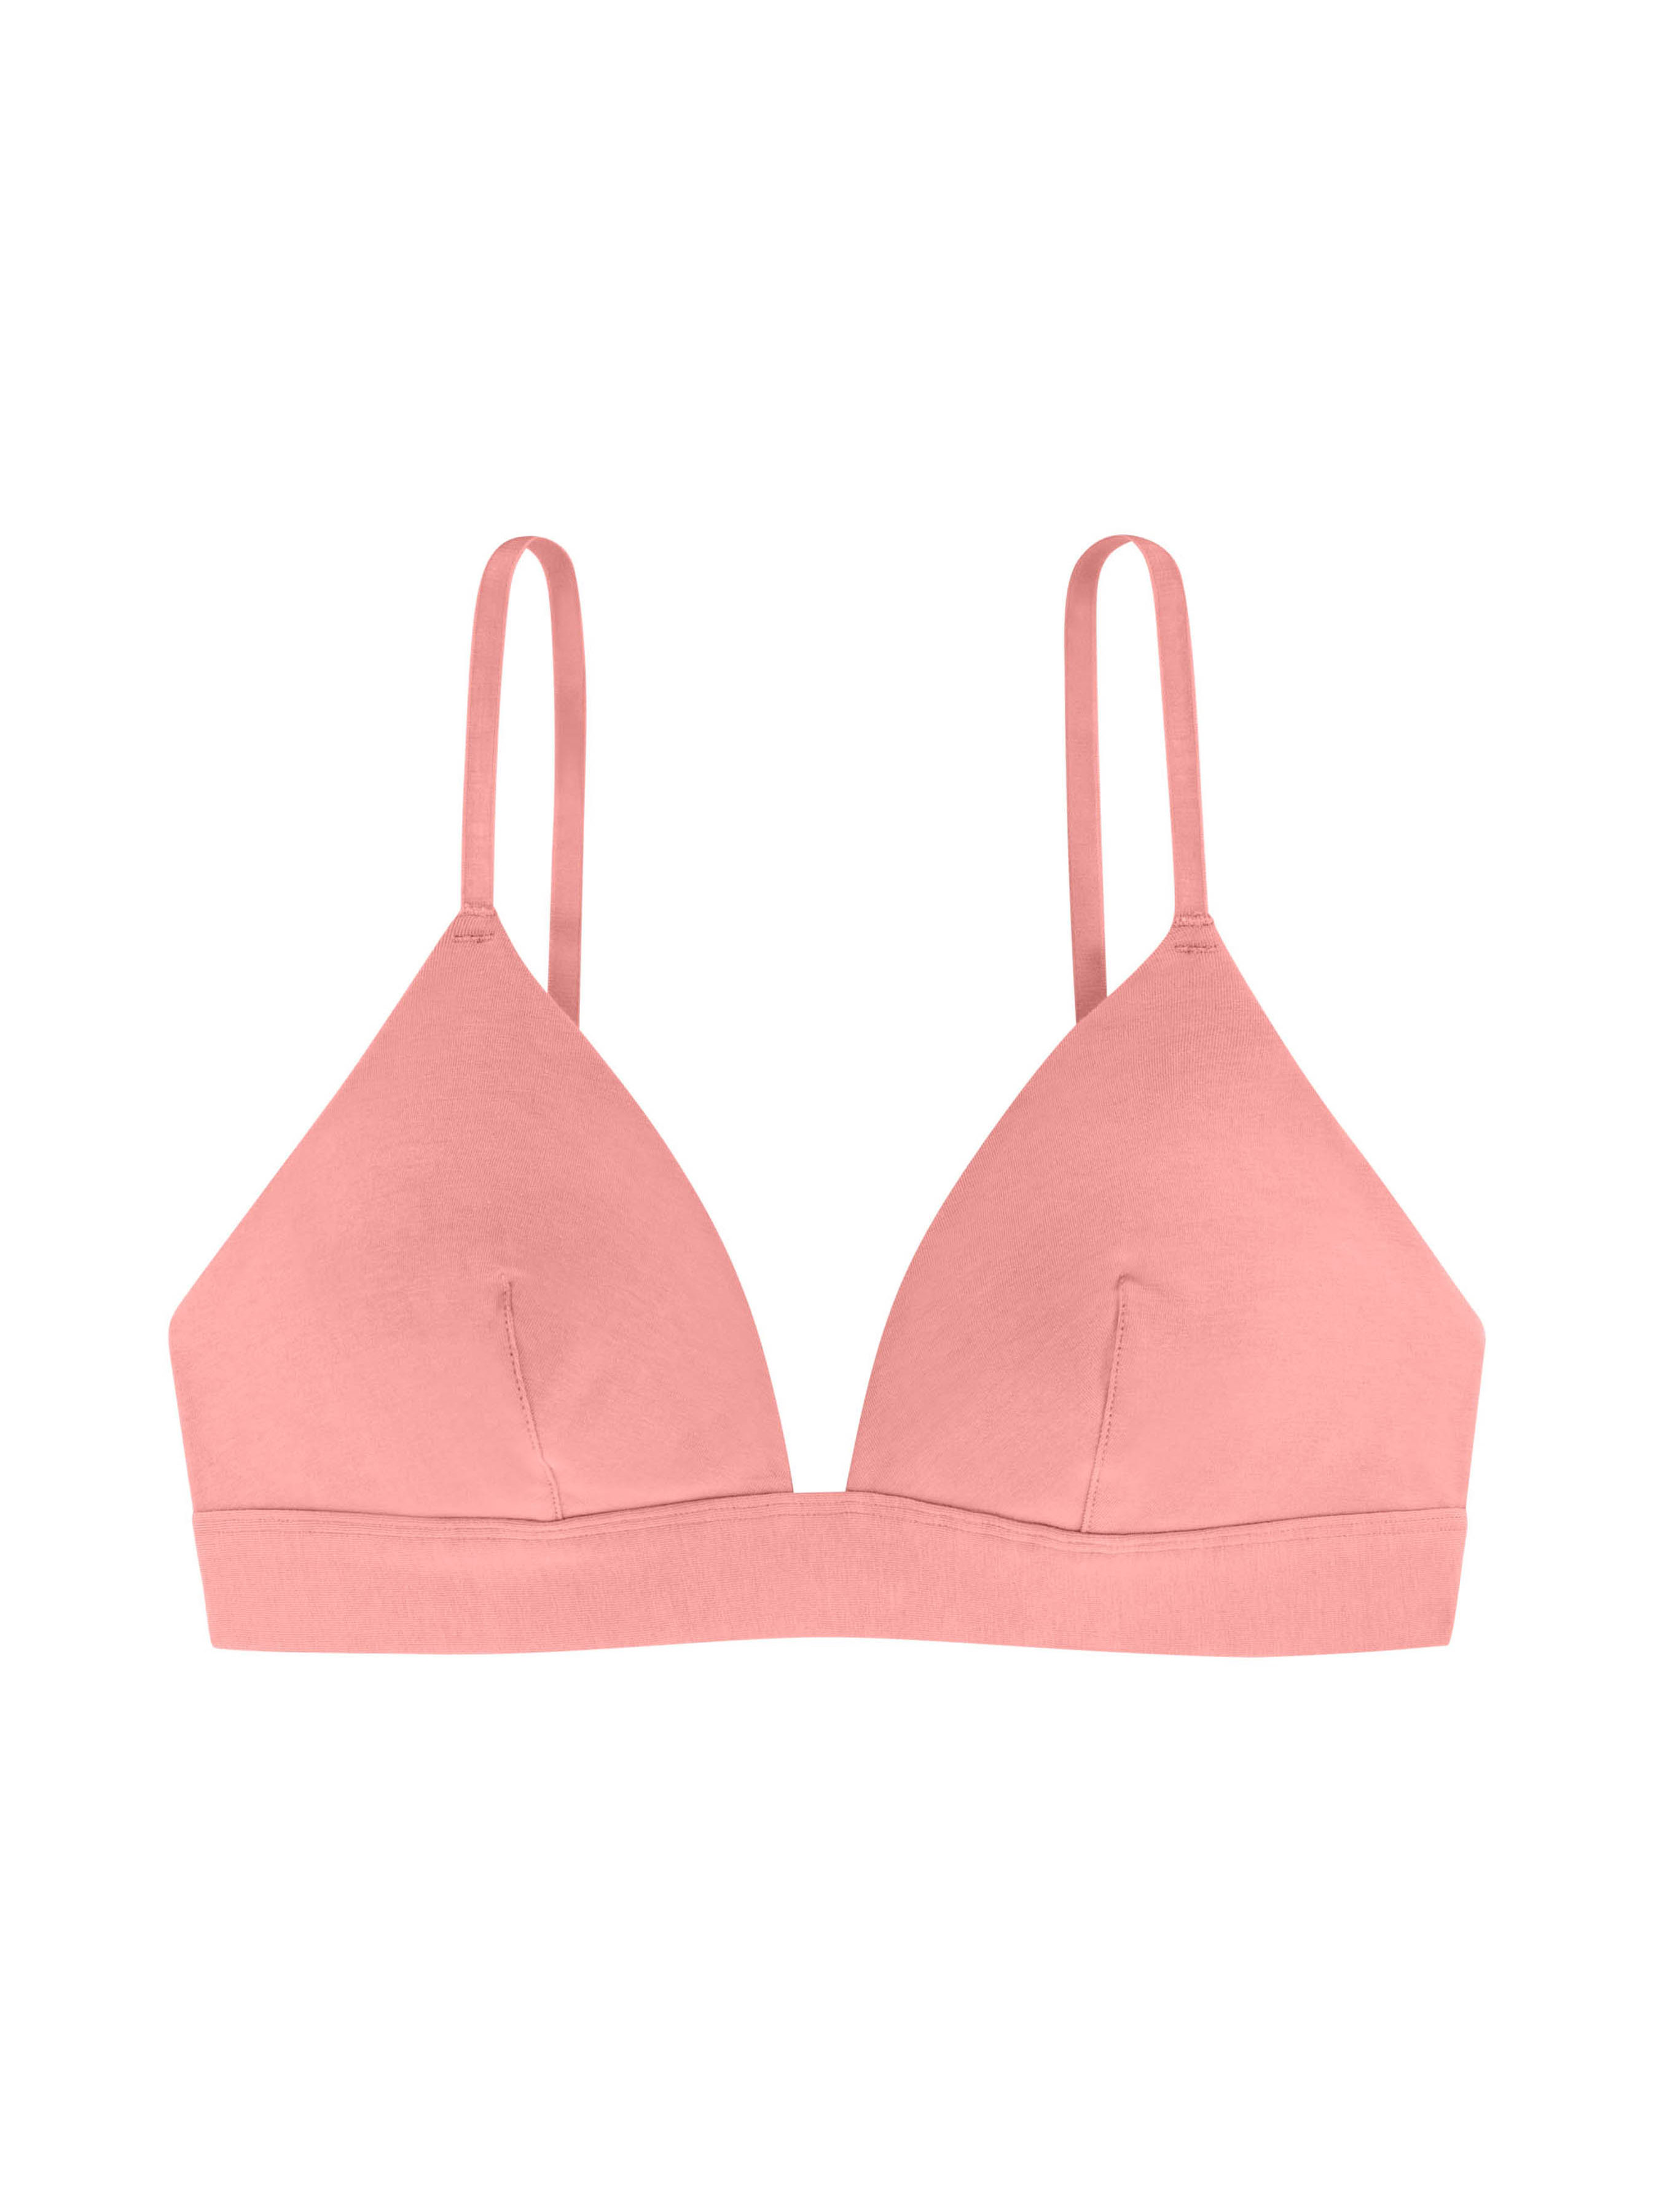 Fabletics Fabletic Dara Seamless Bralette Bright Pink EUC Size XS - $12 -  From Andrelina